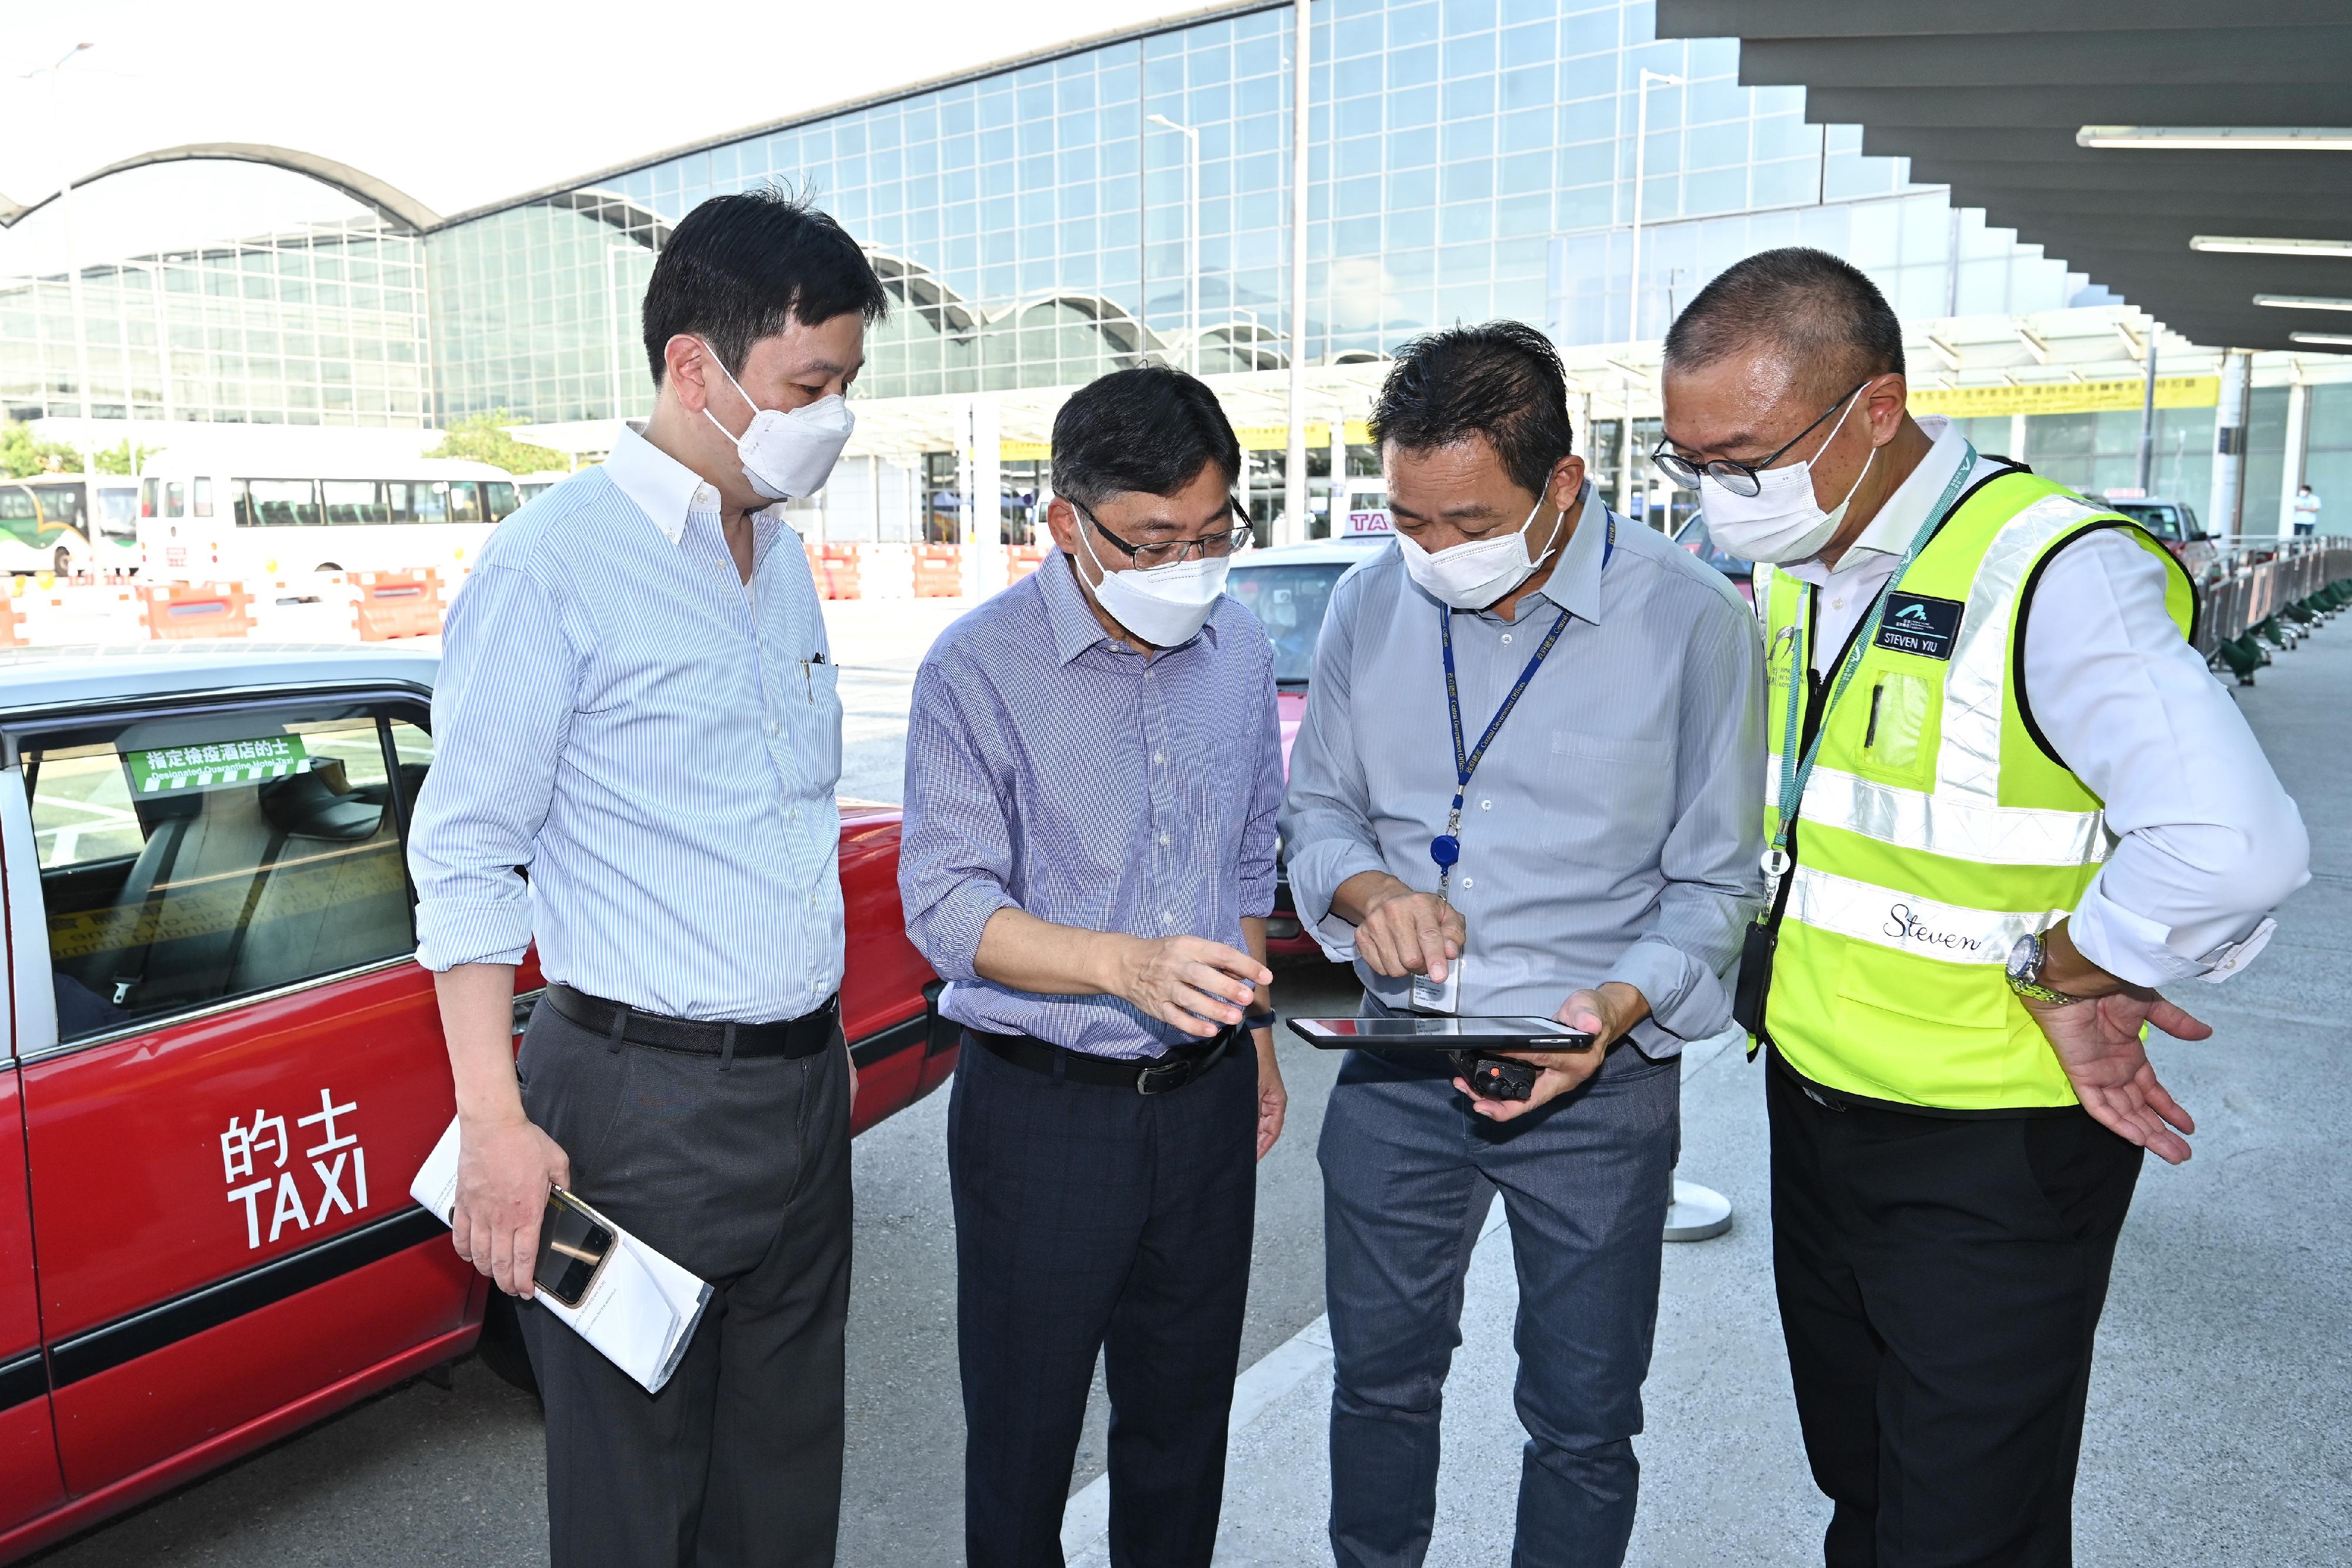 On the first day (July 25) of the trial run of the self-paid designated quarantine hotel (DQH) taxi services, the Secretary for Transport and Logistics, Mr Lam Sai-hung (second left), and Deputy Secretary for Health (Special Duties), Mr Vincent Fung (first left), inspect the self-paid DQH taxis at Hong Kong International Airport. 